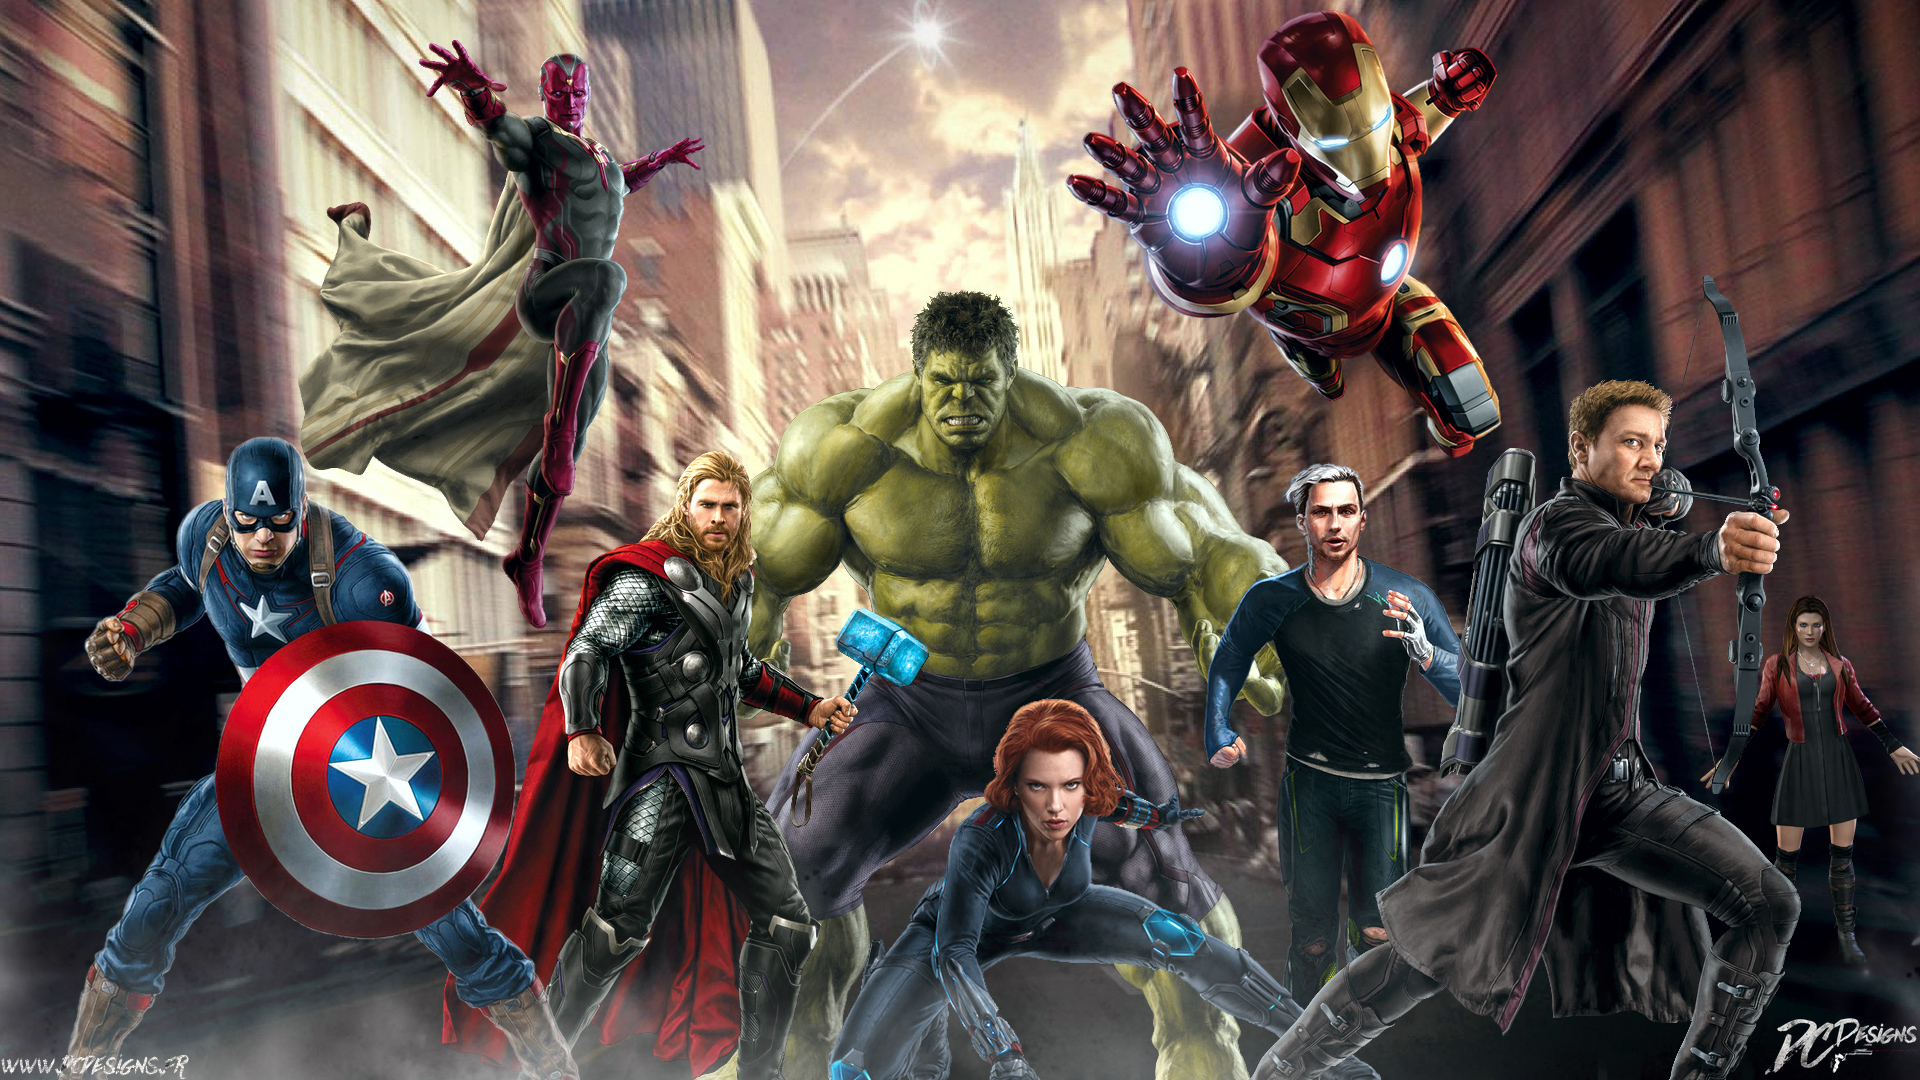 Free download wallpaper Hulk, Iron Man, Captain America, Movie, Thor, Black Widow, Hawkeye, Vision (Marvel Comics), The Avengers, Scarlet Witch, Avengers: Age Of Ultron, Quicksilver (Marvel Comics) on your PC desktop